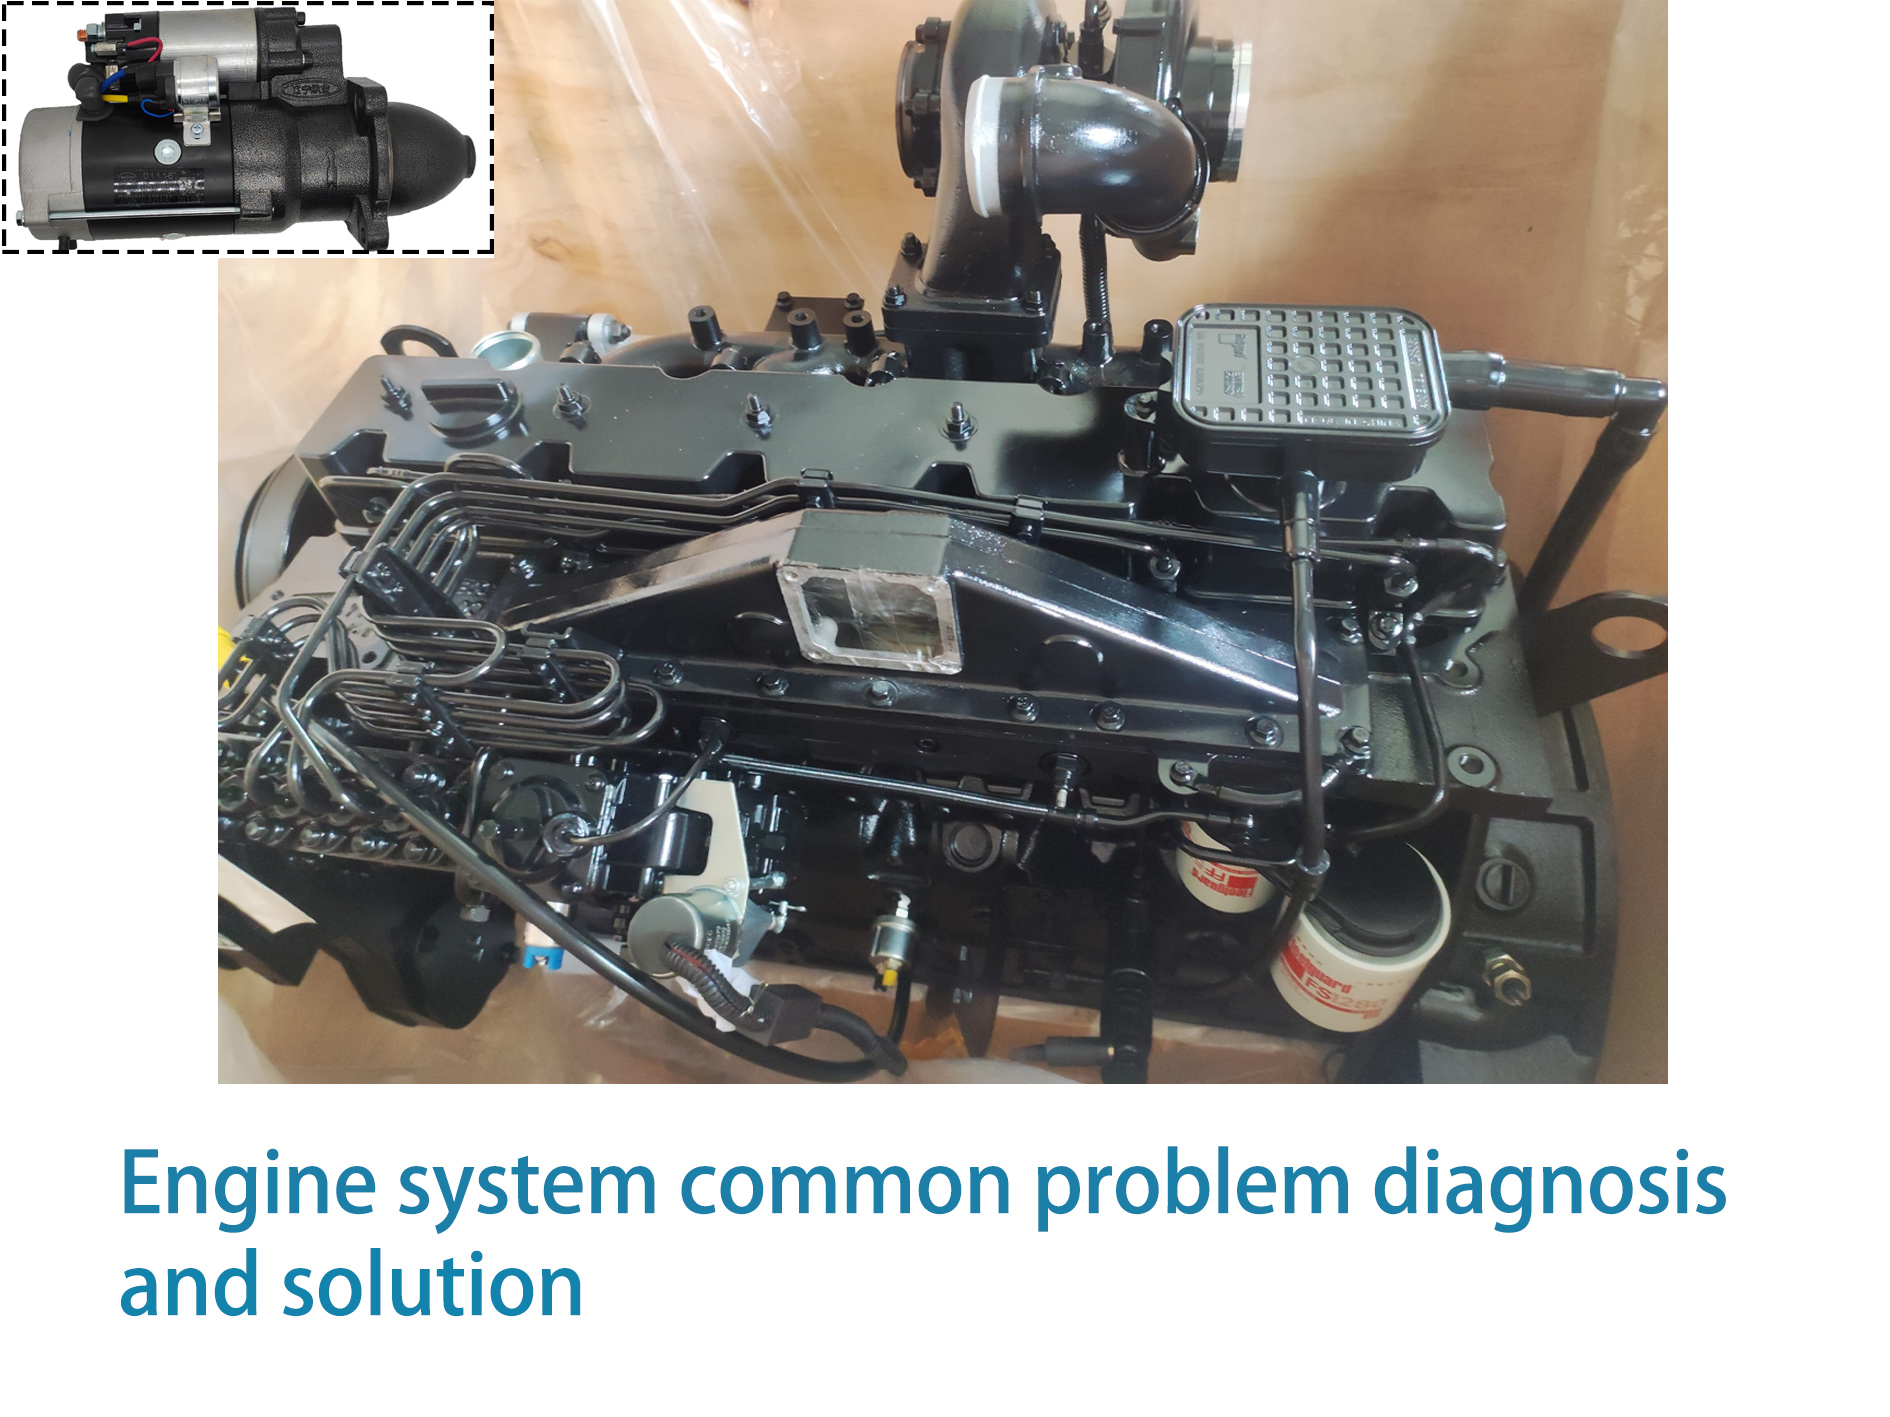 Engine system common problem diagnosis and solution